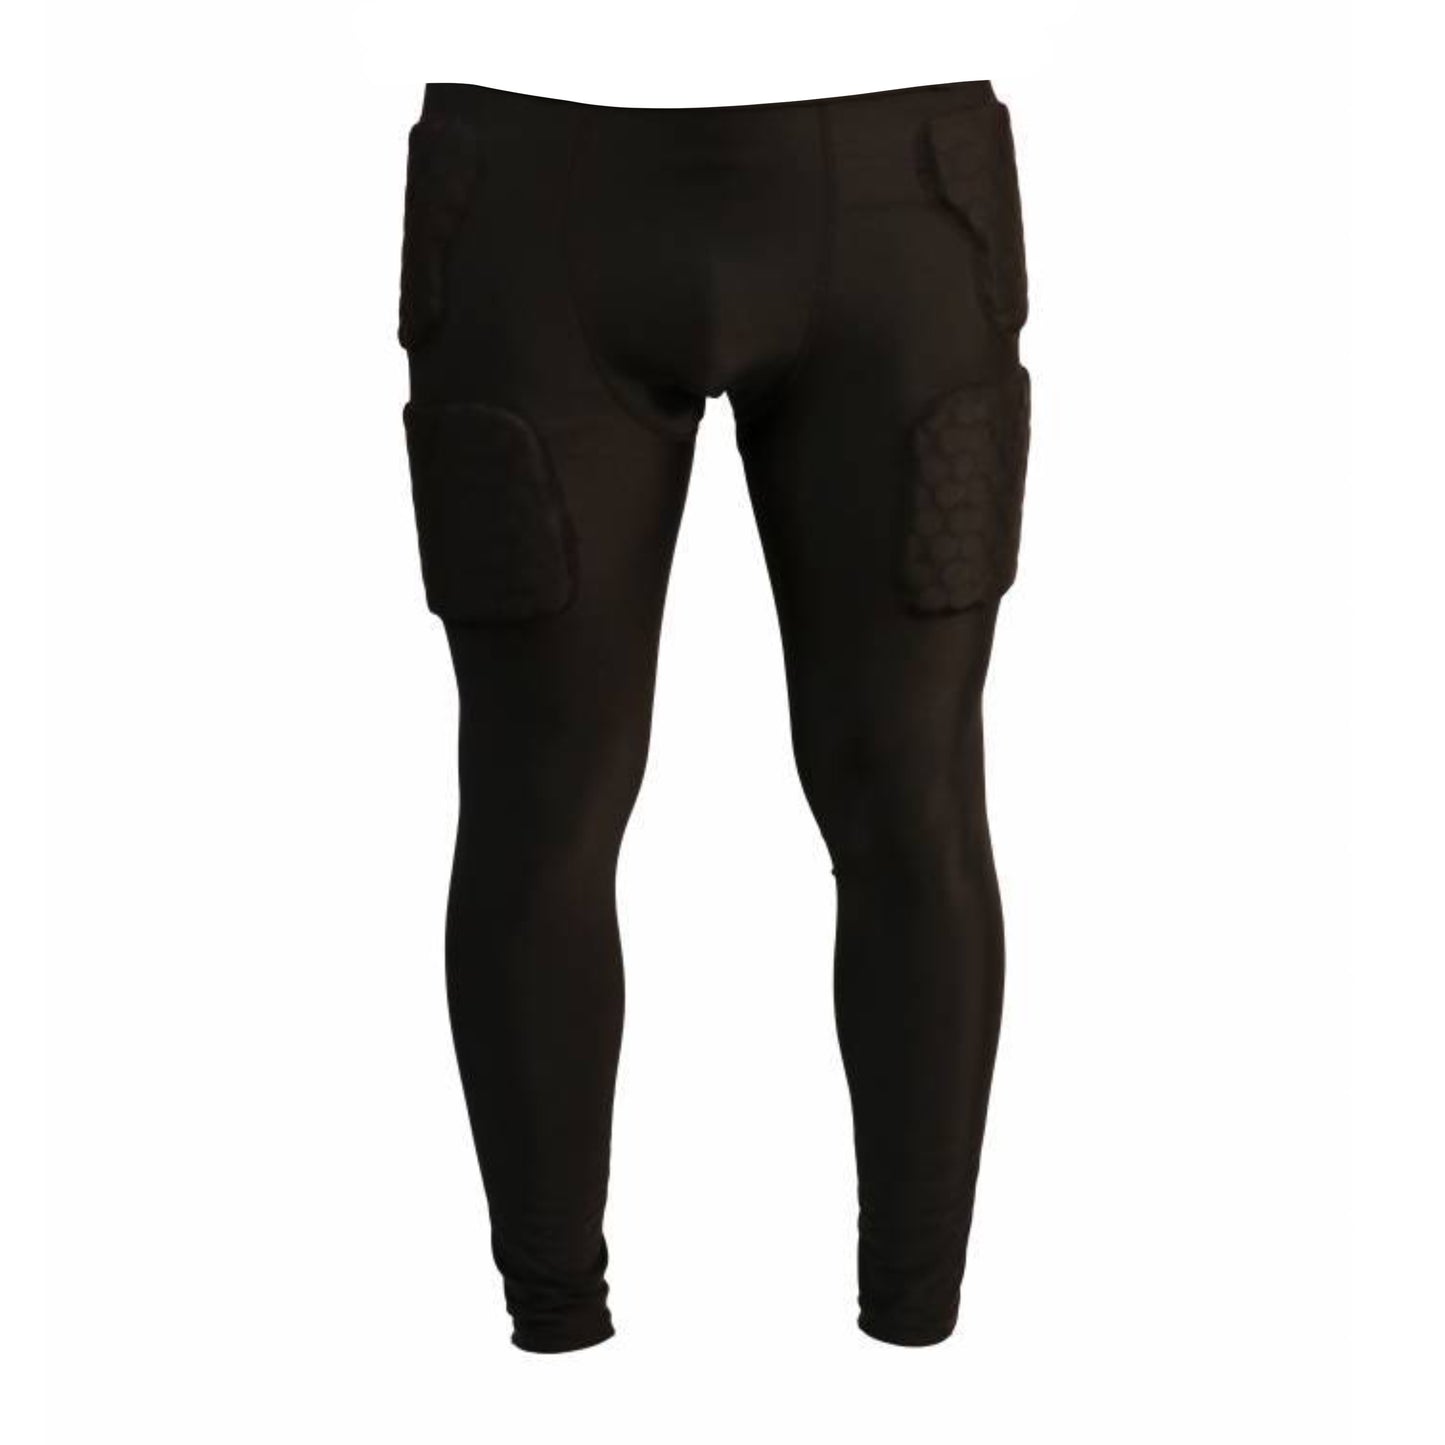 FS-07 Compression pants, 5 integrated pieces, for American football